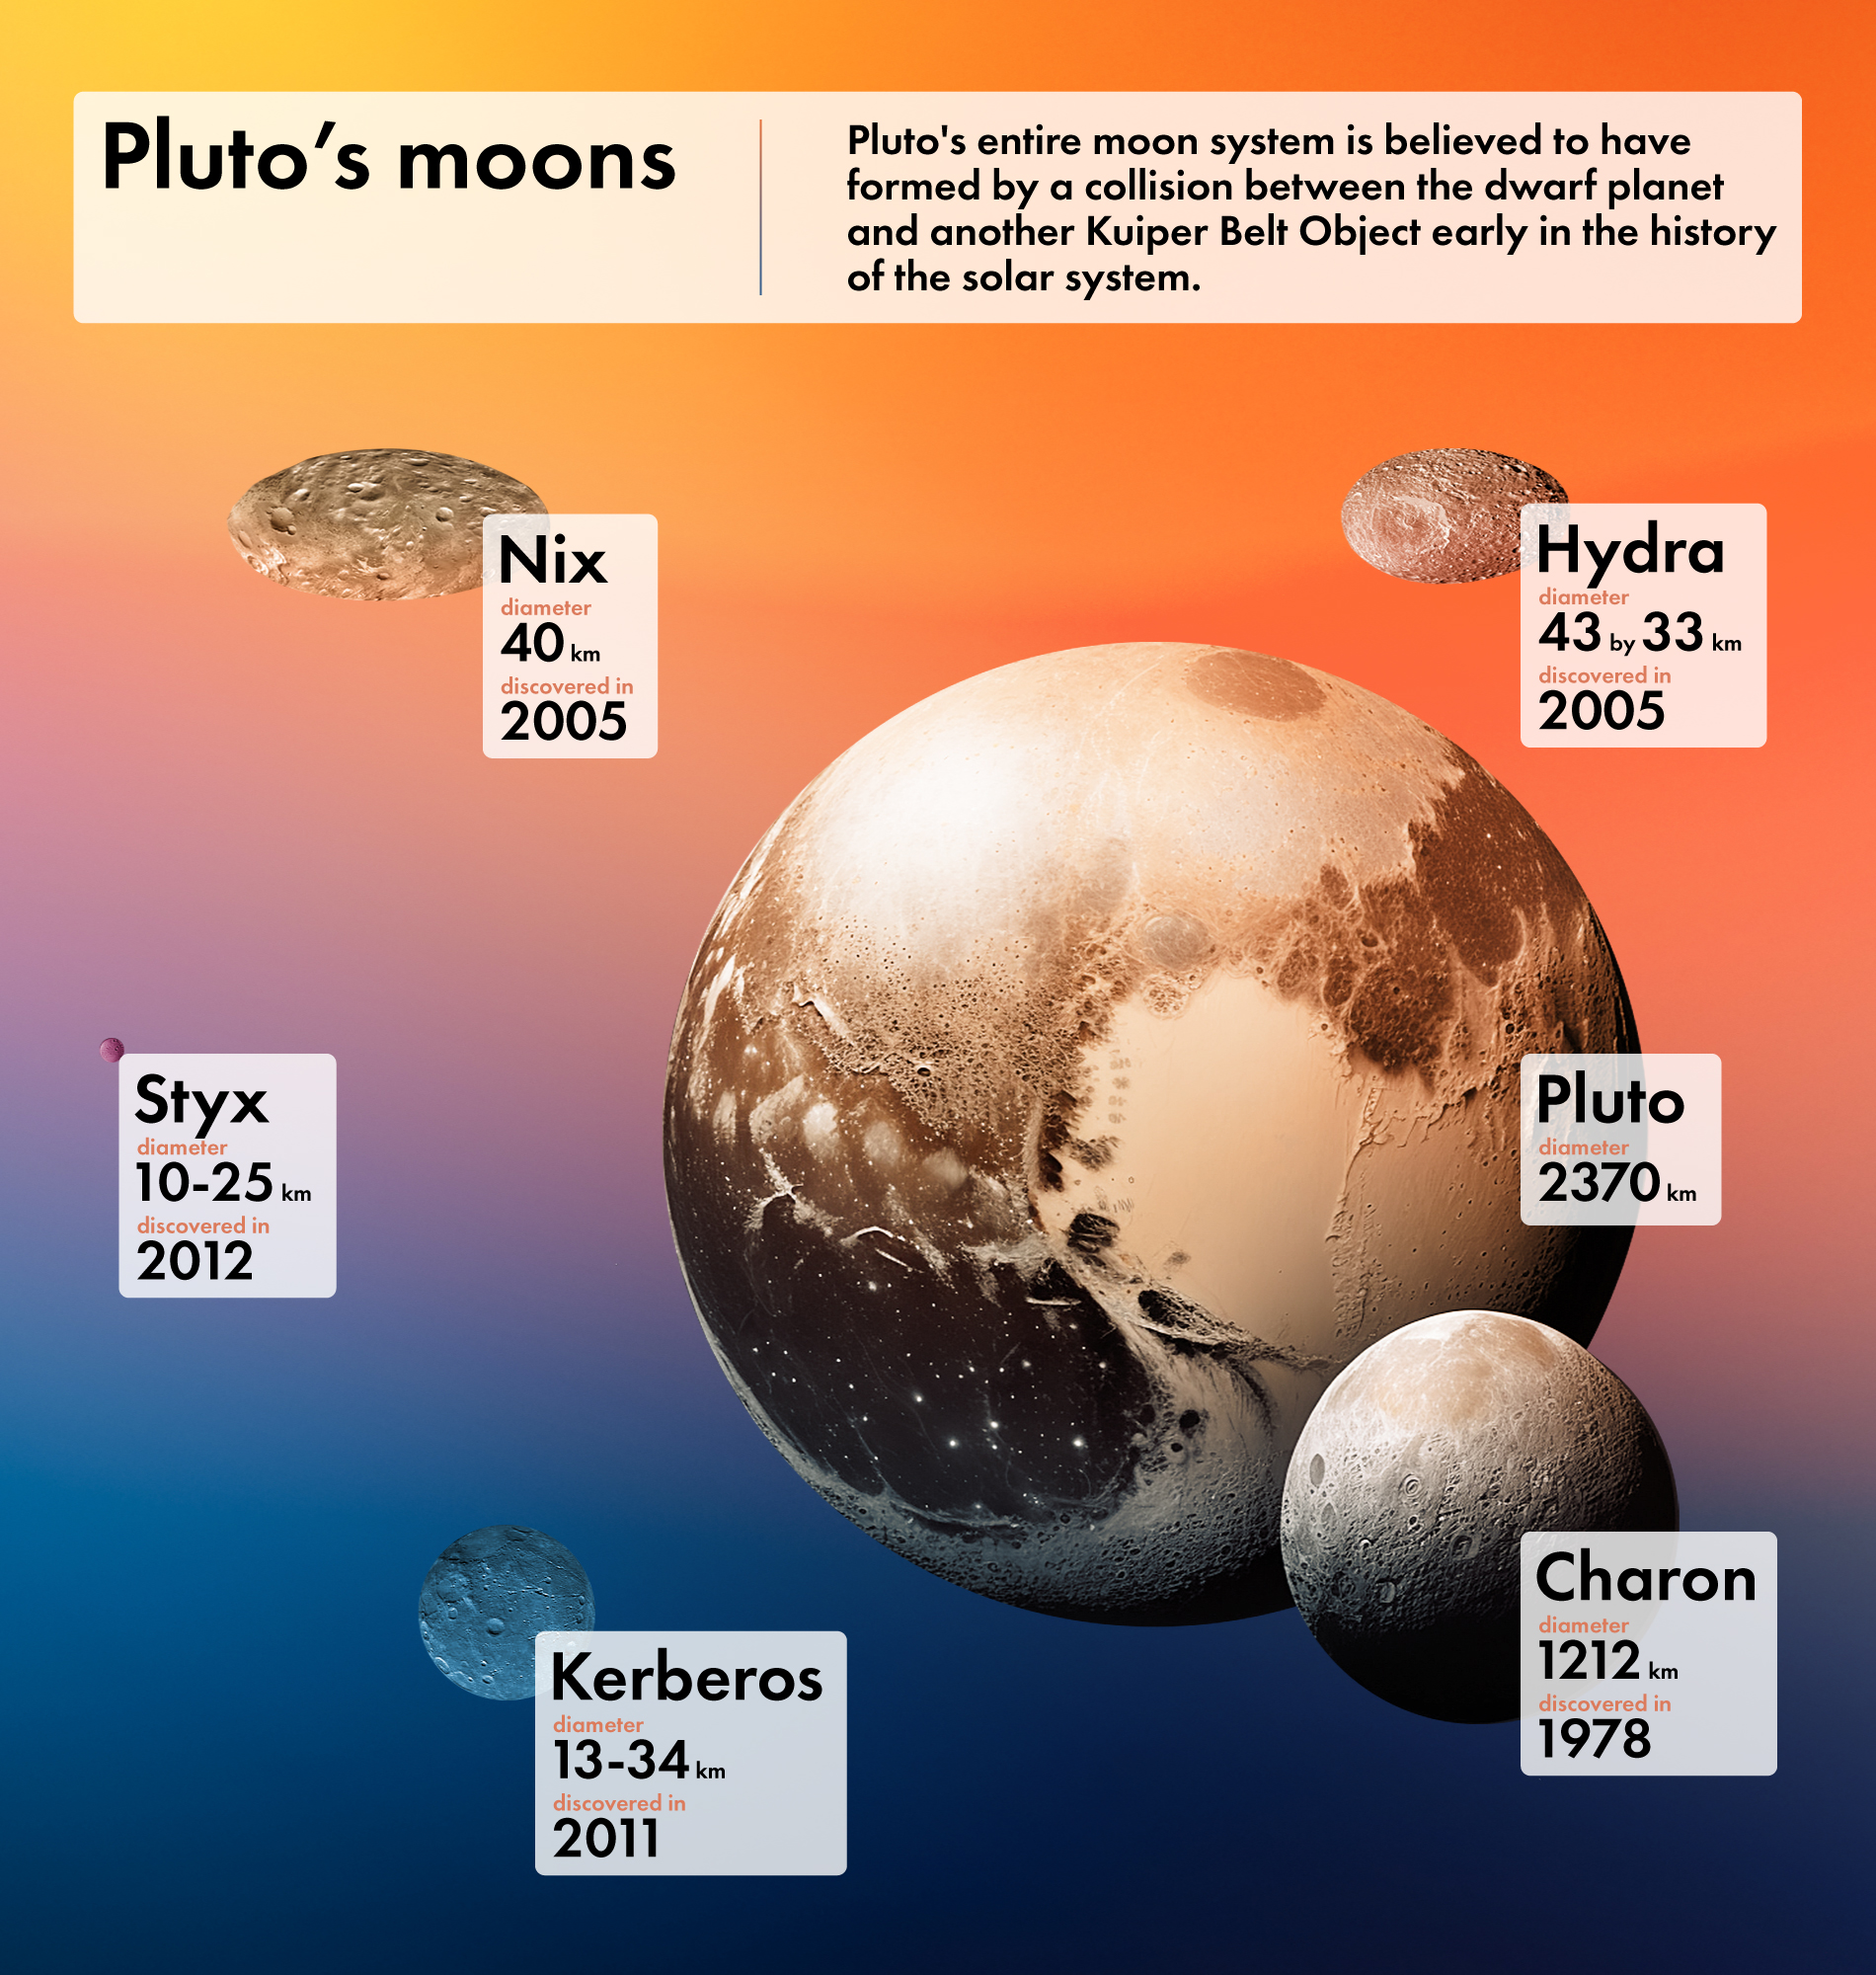 Pluto moons : 5 Secrets of the Most Mysterious Dwarf Planet - Orbital Today